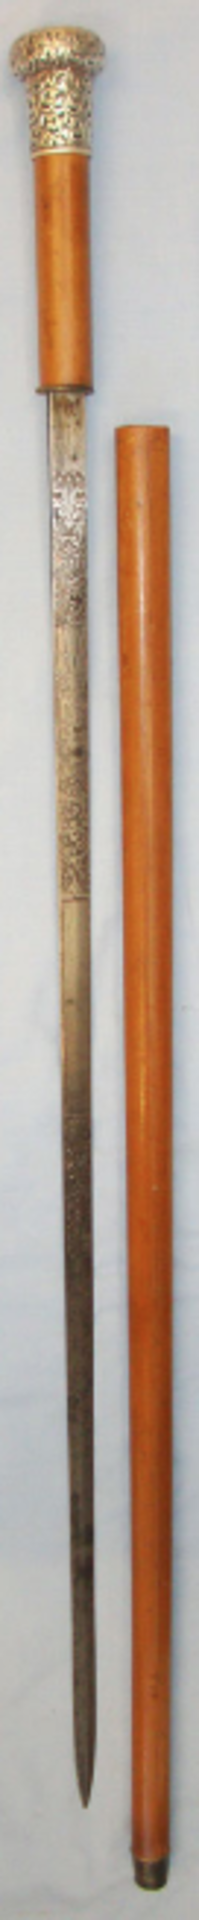 Edwardian Gentleman’s Mallaca Sword Stick With Sterling Silver, HM Ball Top Handle & Etched Blade - Image 3 of 3